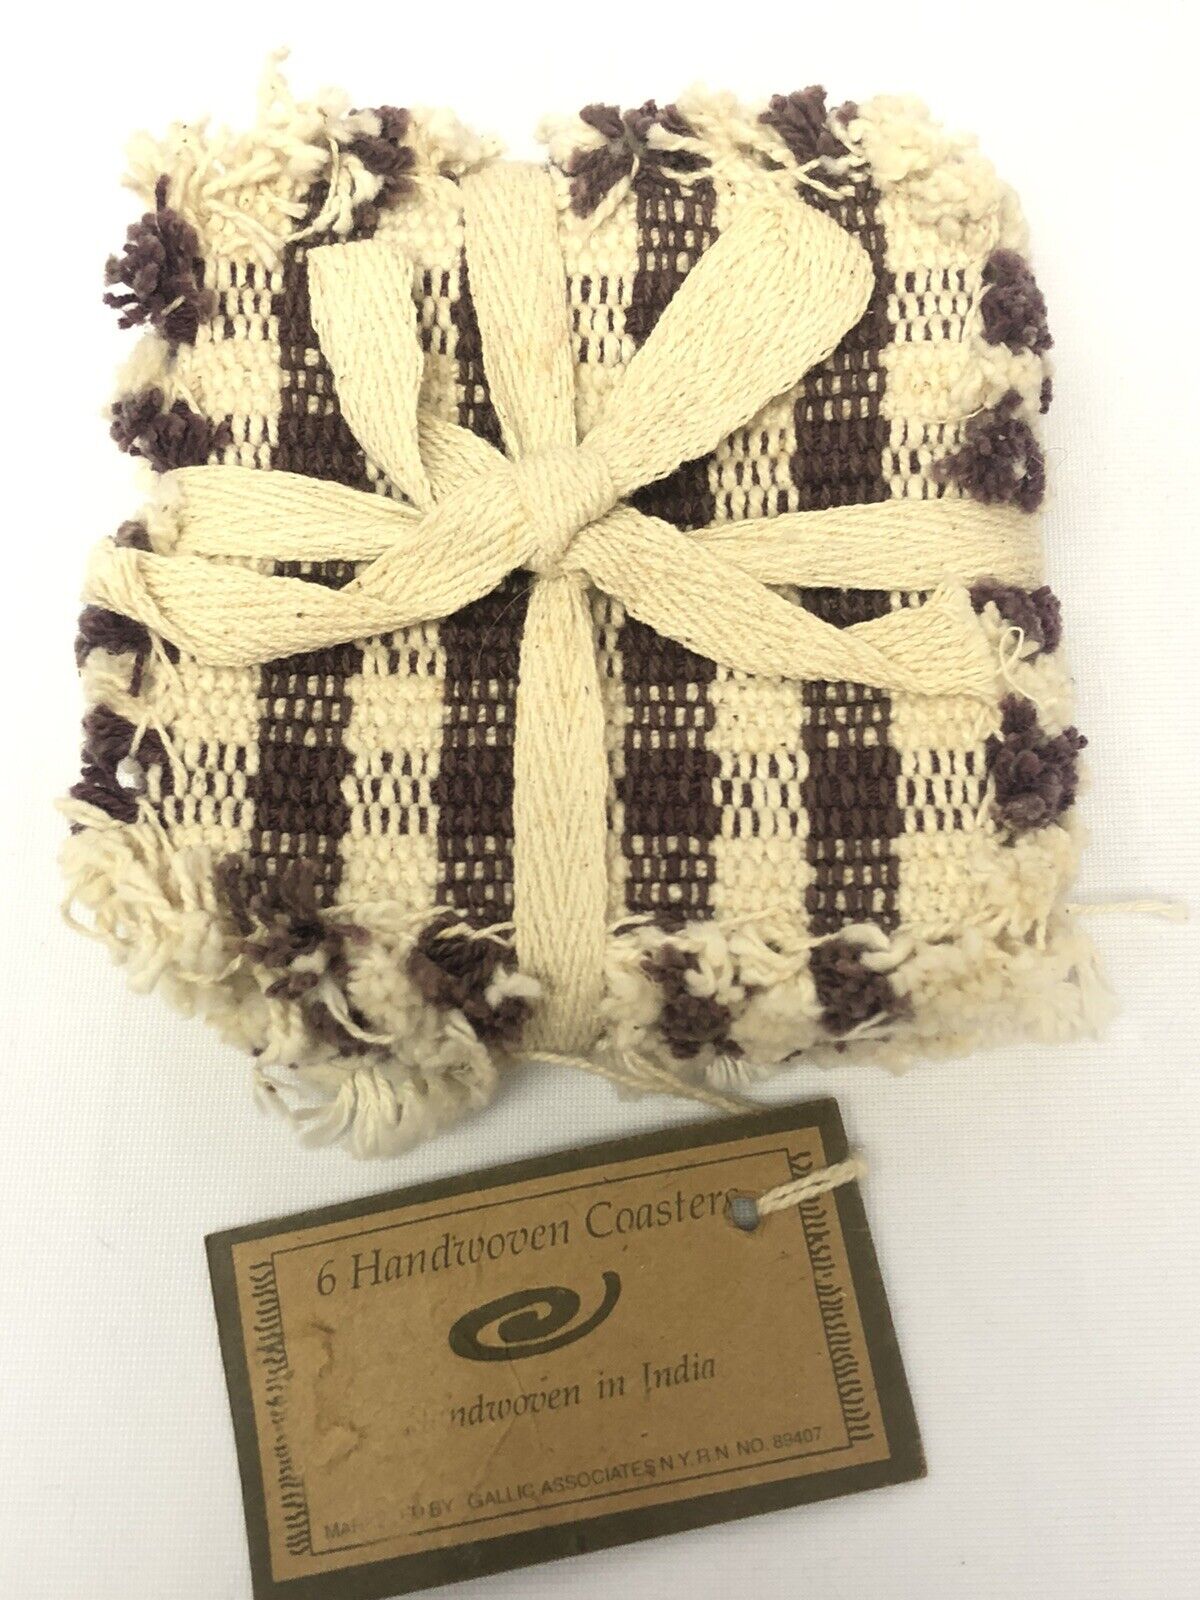 Hand Woven Coasters Purple Beige Fringe 100% Cotton Set Of 6 Made In India New